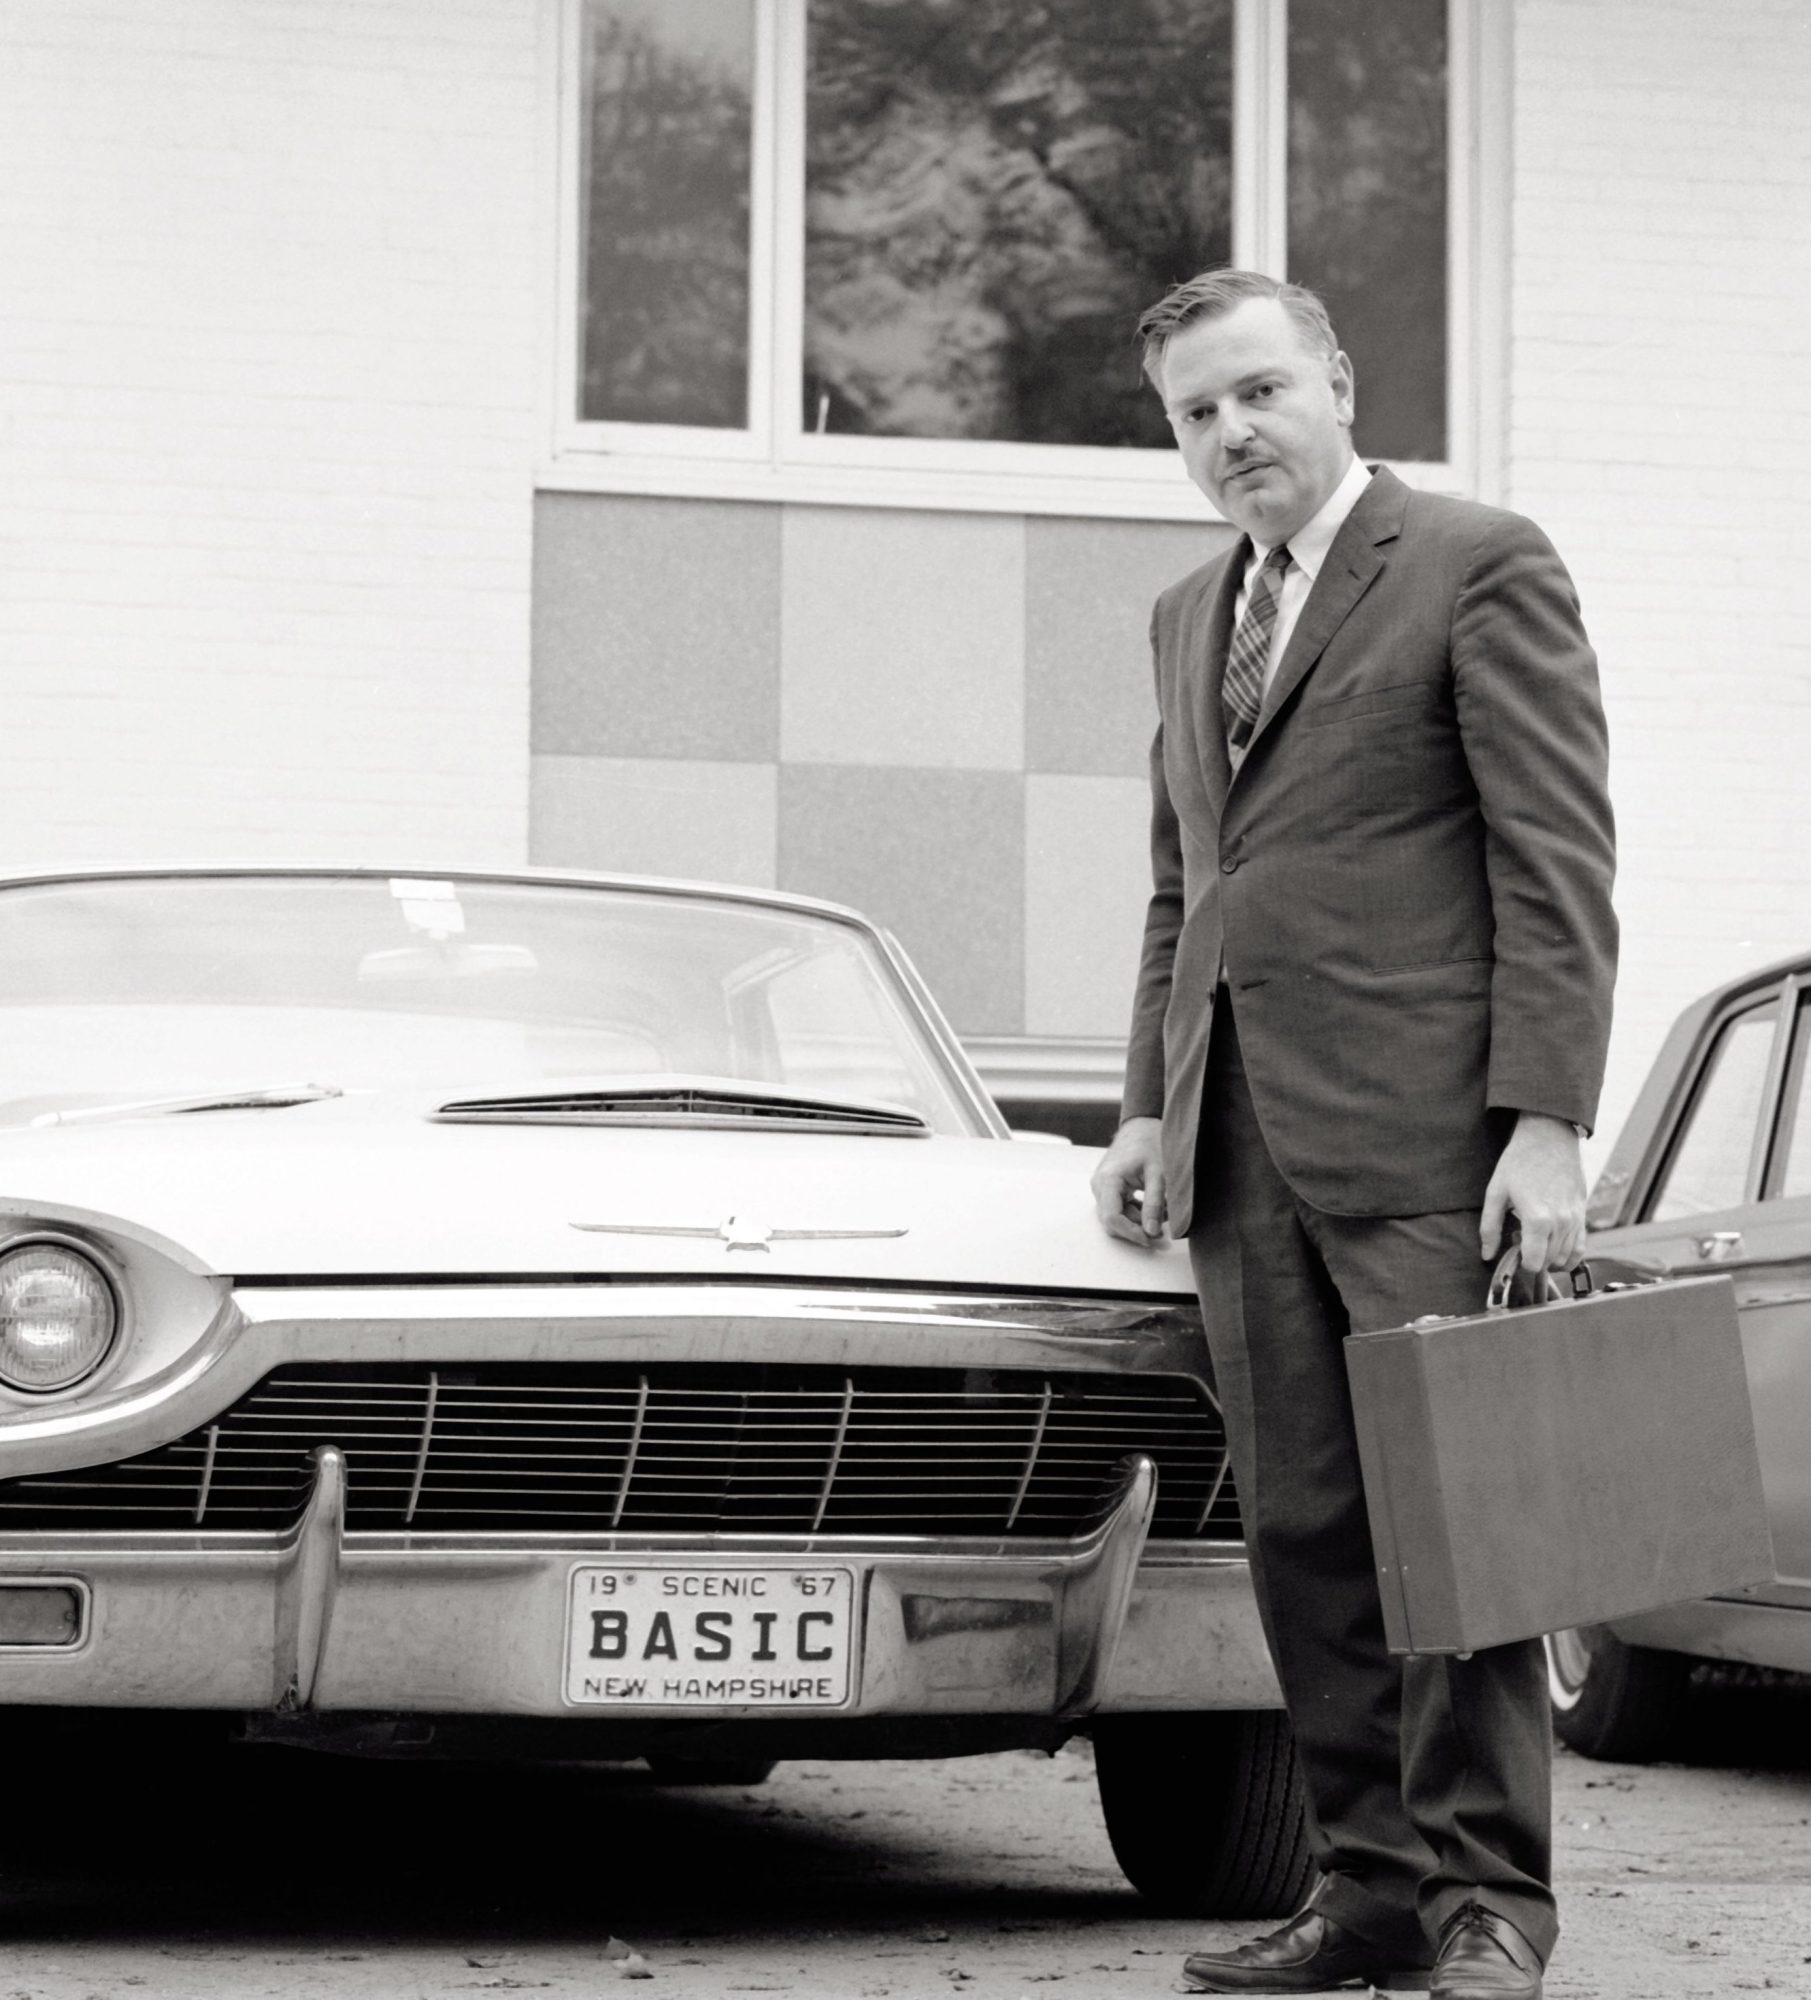 John Kemeny standing in a parking lot by a car with the New Hampshire vanity plate "BASIC"